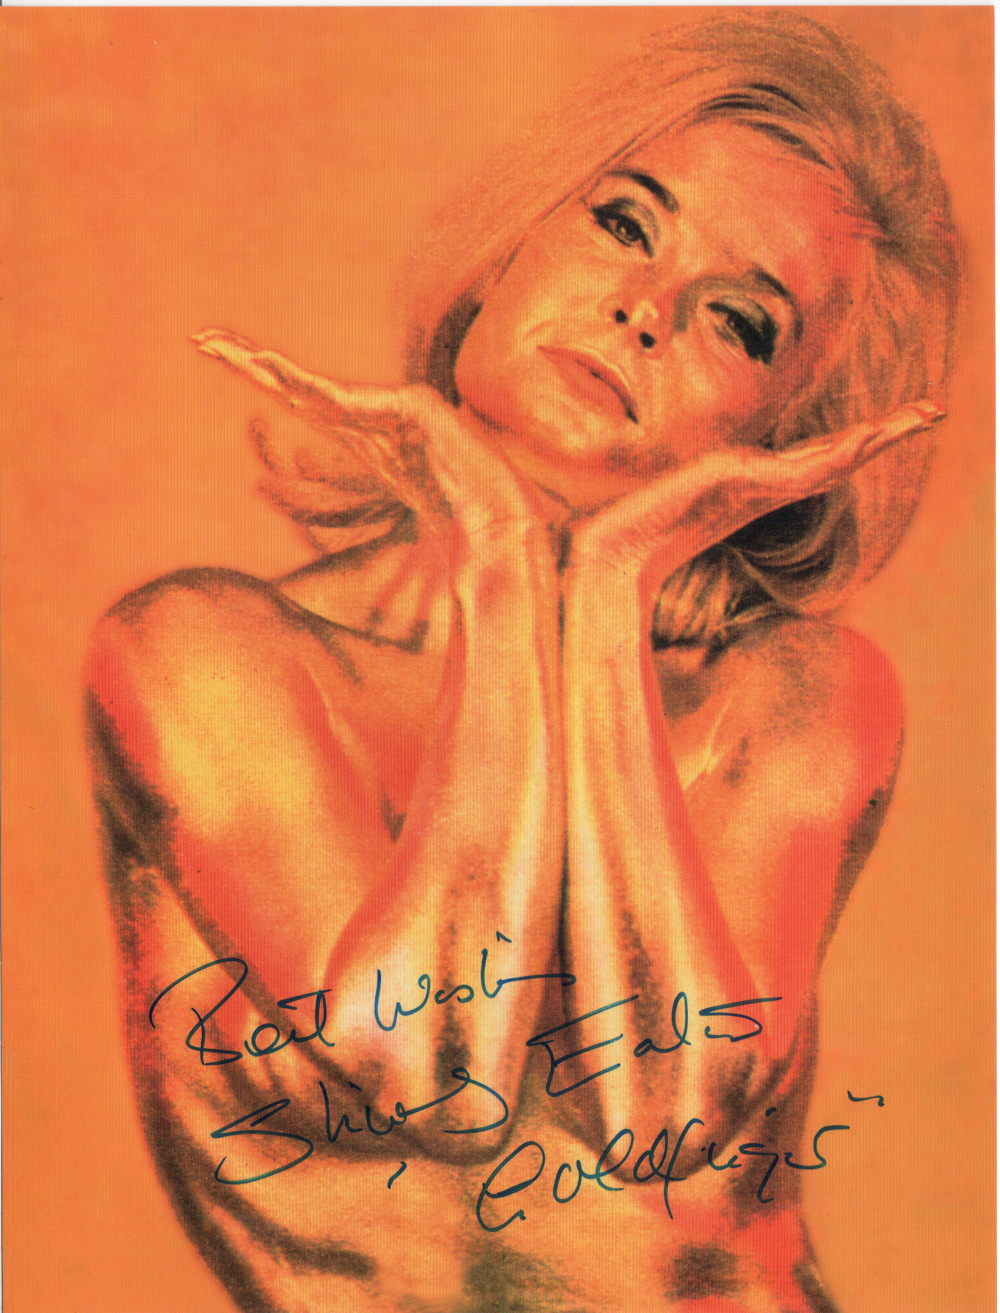 Best Wishes Shirley Eaton (played Jill Masterson in Goldfinger 1964)  to James Bond 007 Museum in Nybro Sweden and Gunnar James Bond Schfer many thanks...